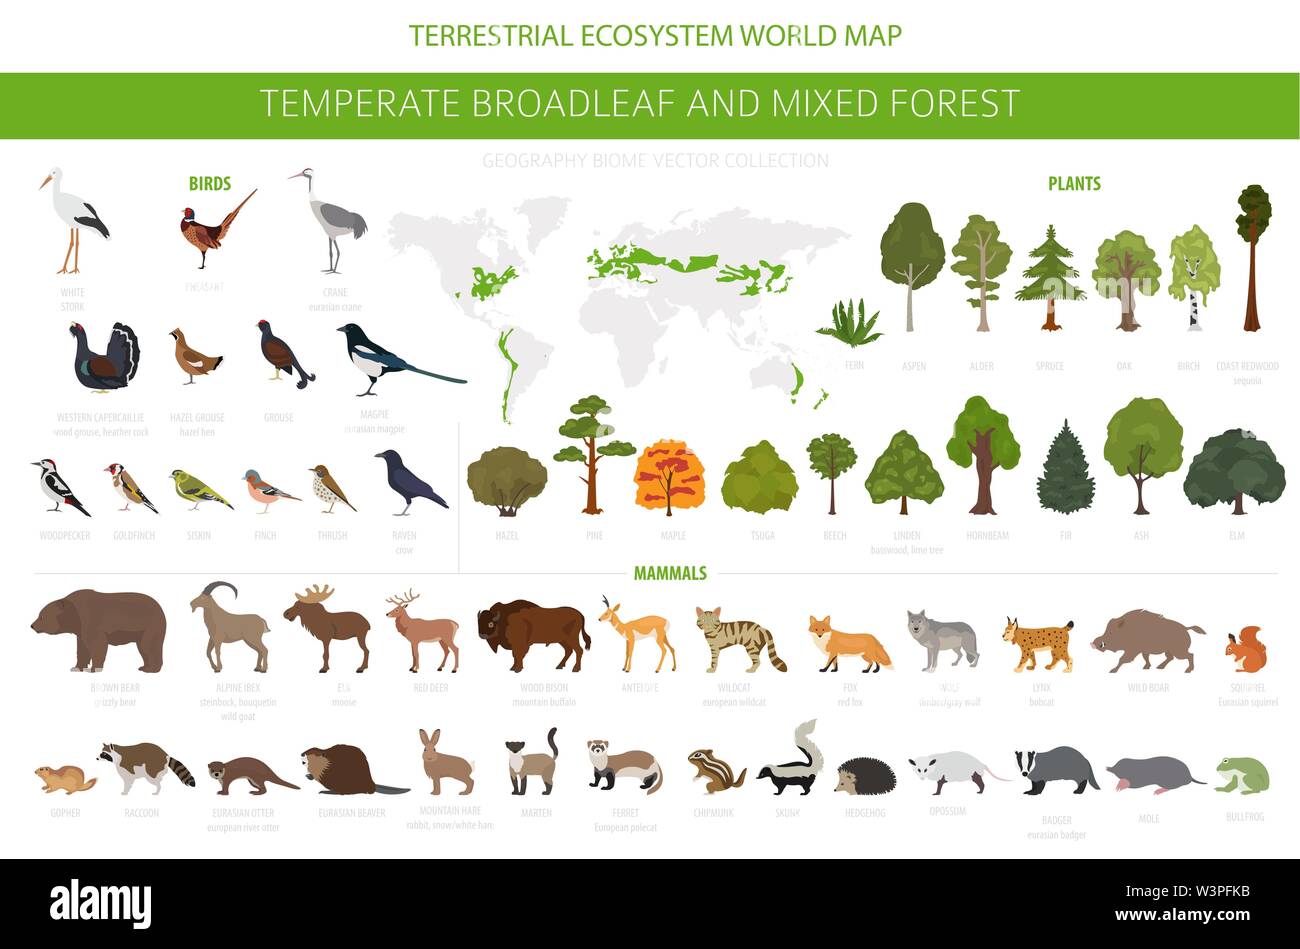 Temperate broadleaf forest and mixed forest biome. Terrestrial ecosystem world map. Animals, birds and plants graphic design. Vector illustration Stock Vector